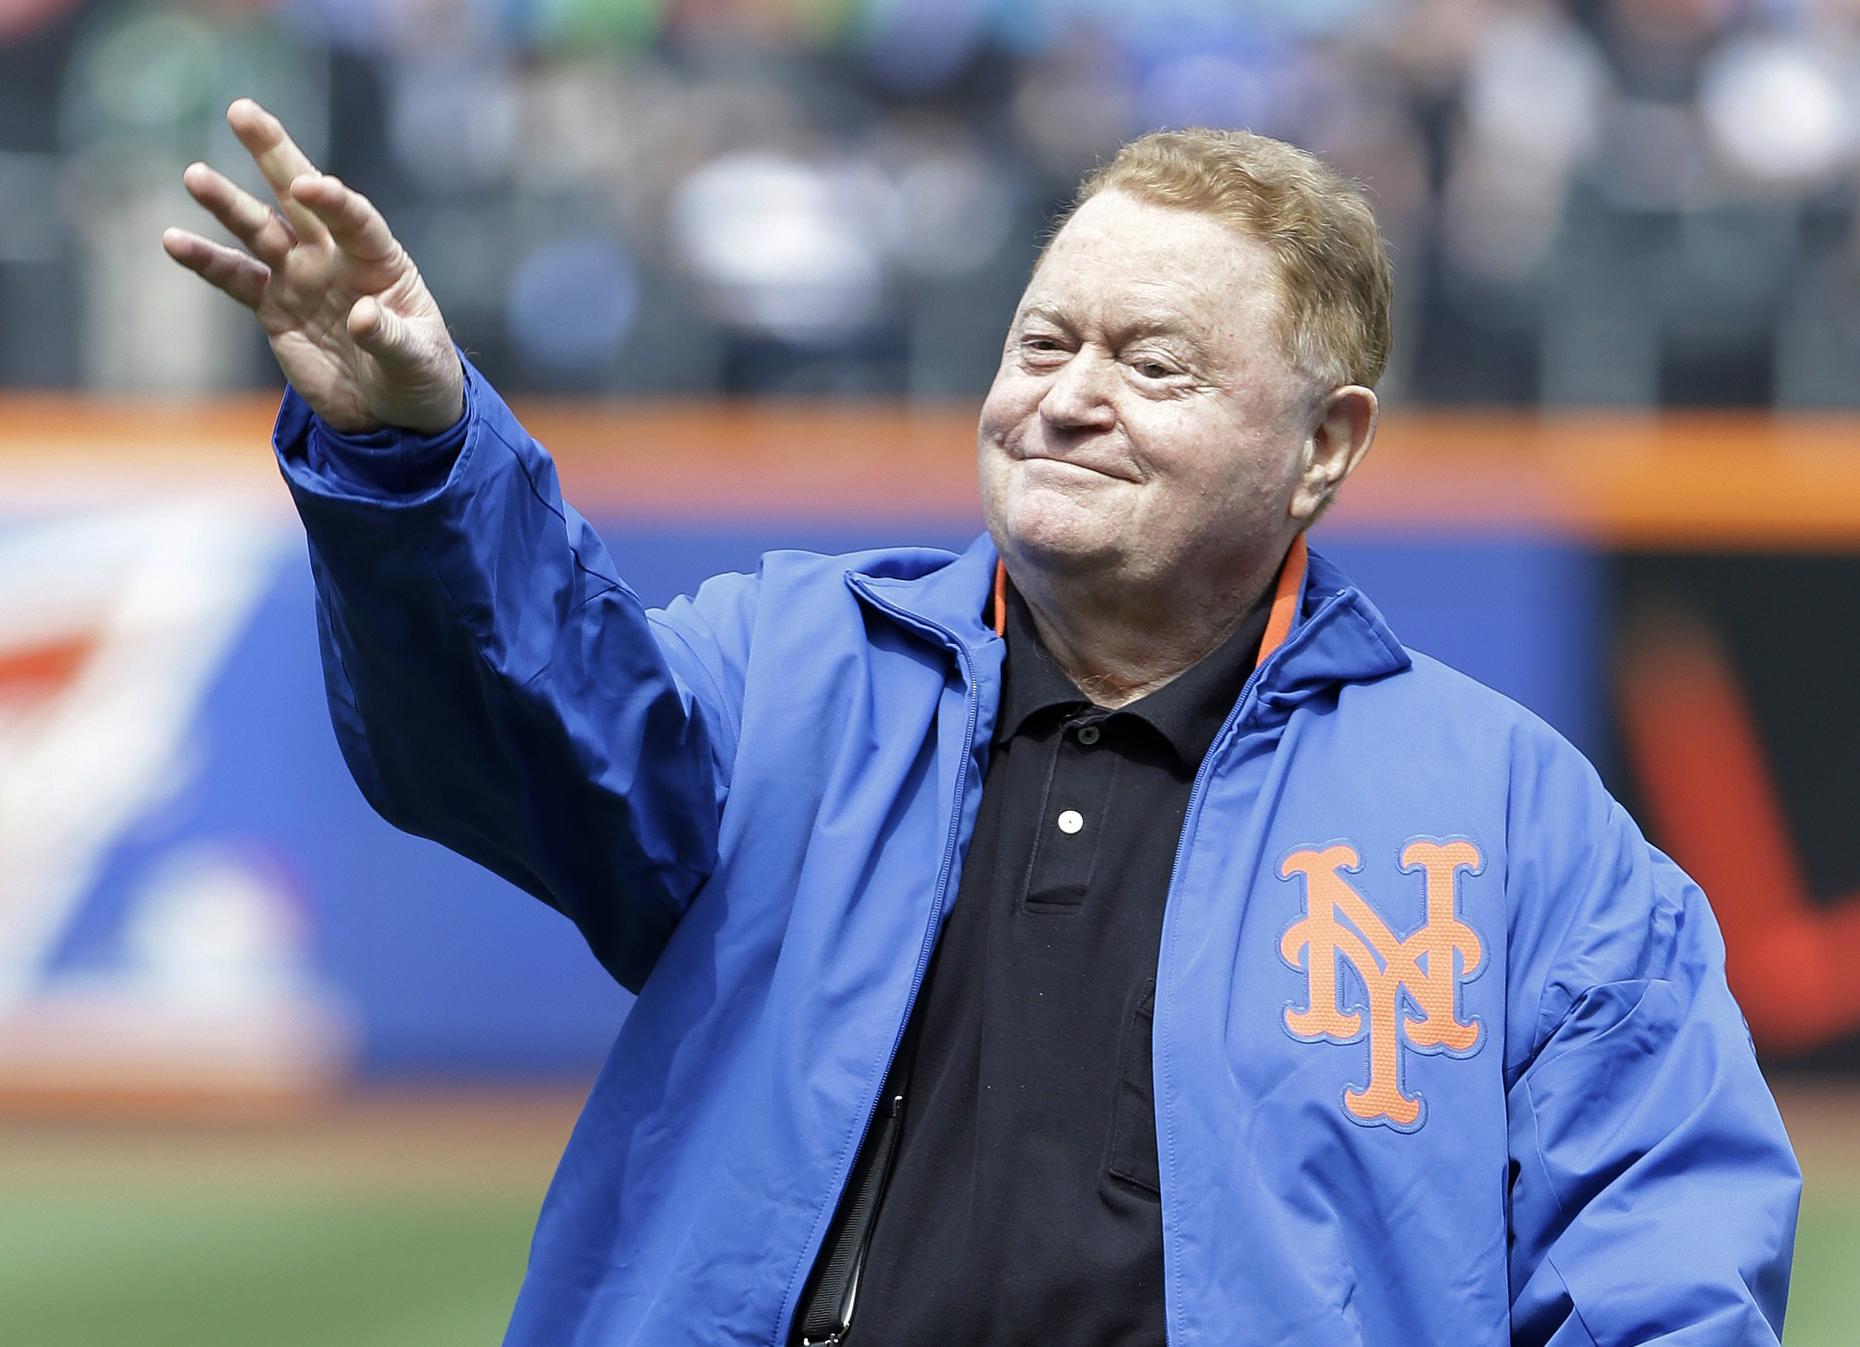 In 1972, the Montreal Expos traded Rusty Staub to the Mets. And